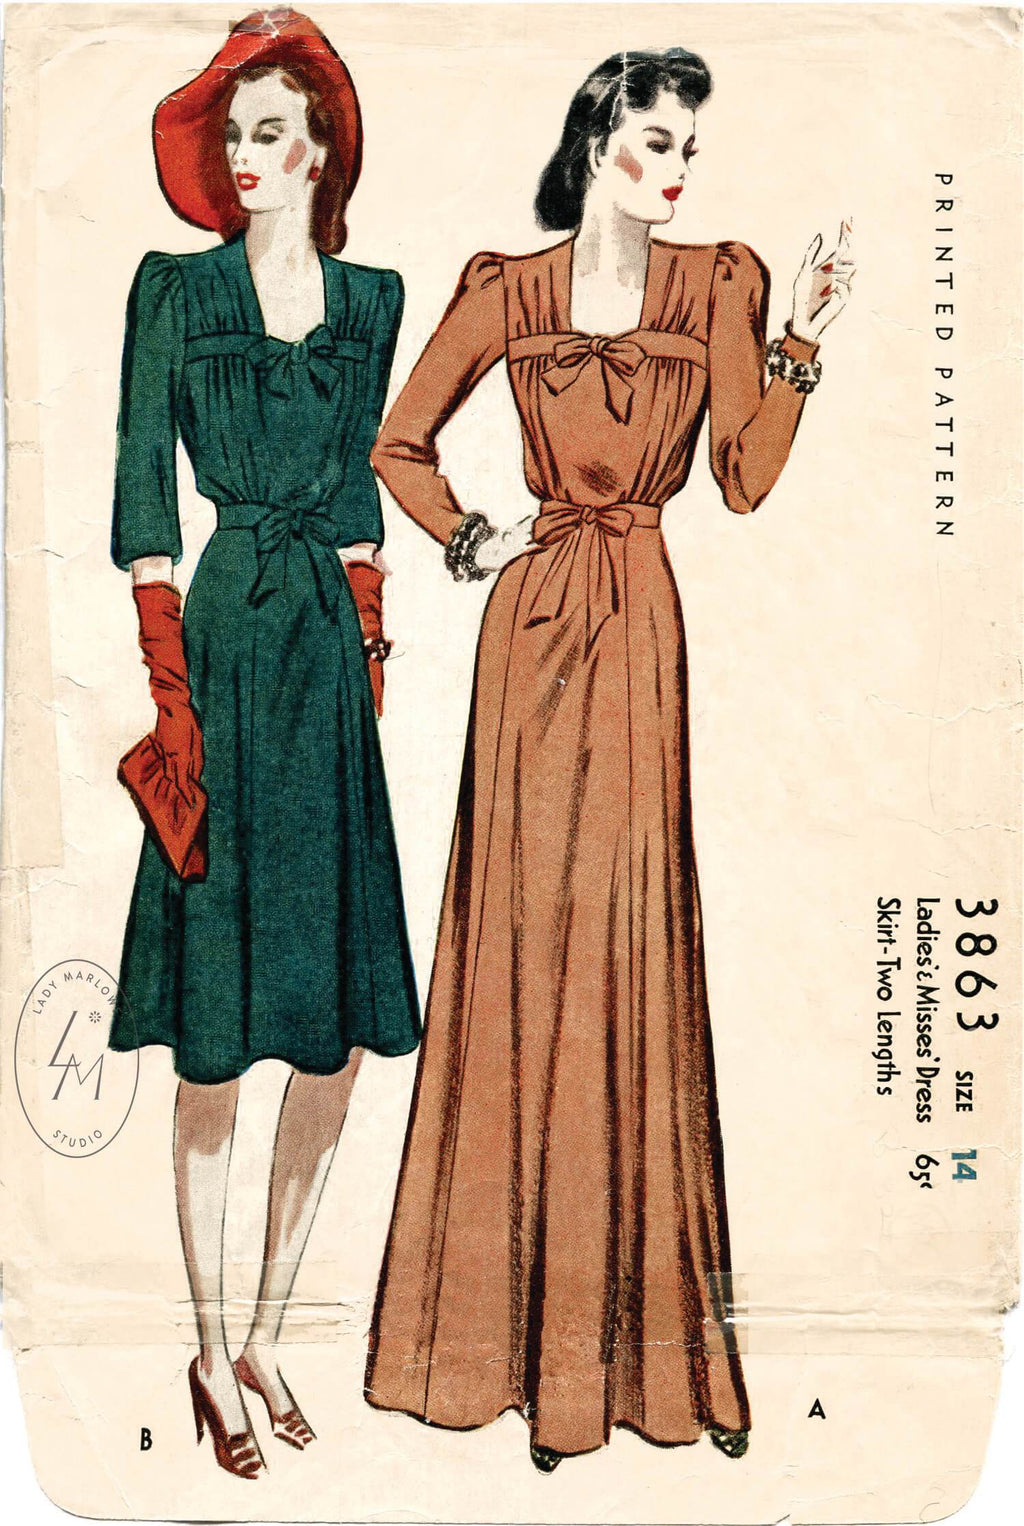 McCall 3863 1940s vintage sewing pattern 1940 40s dress evening gown